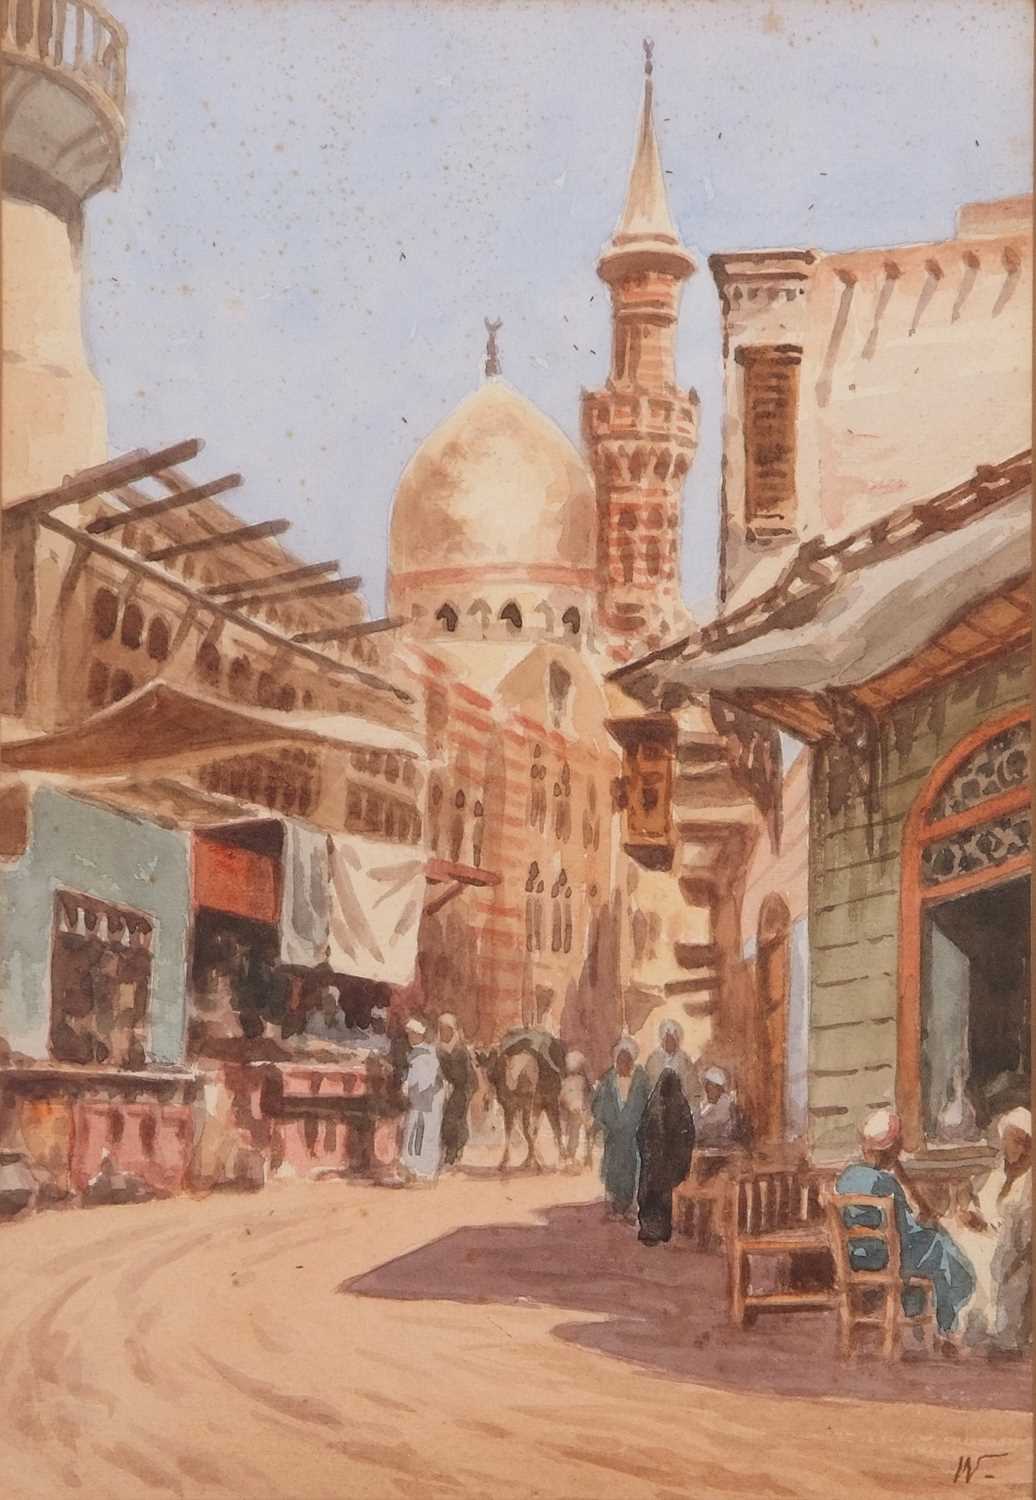 Edwin Lord Weeks (American, 1849-1903), "A Street Scene, Cairo", watercolour, signed monogram, - Image 3 of 3